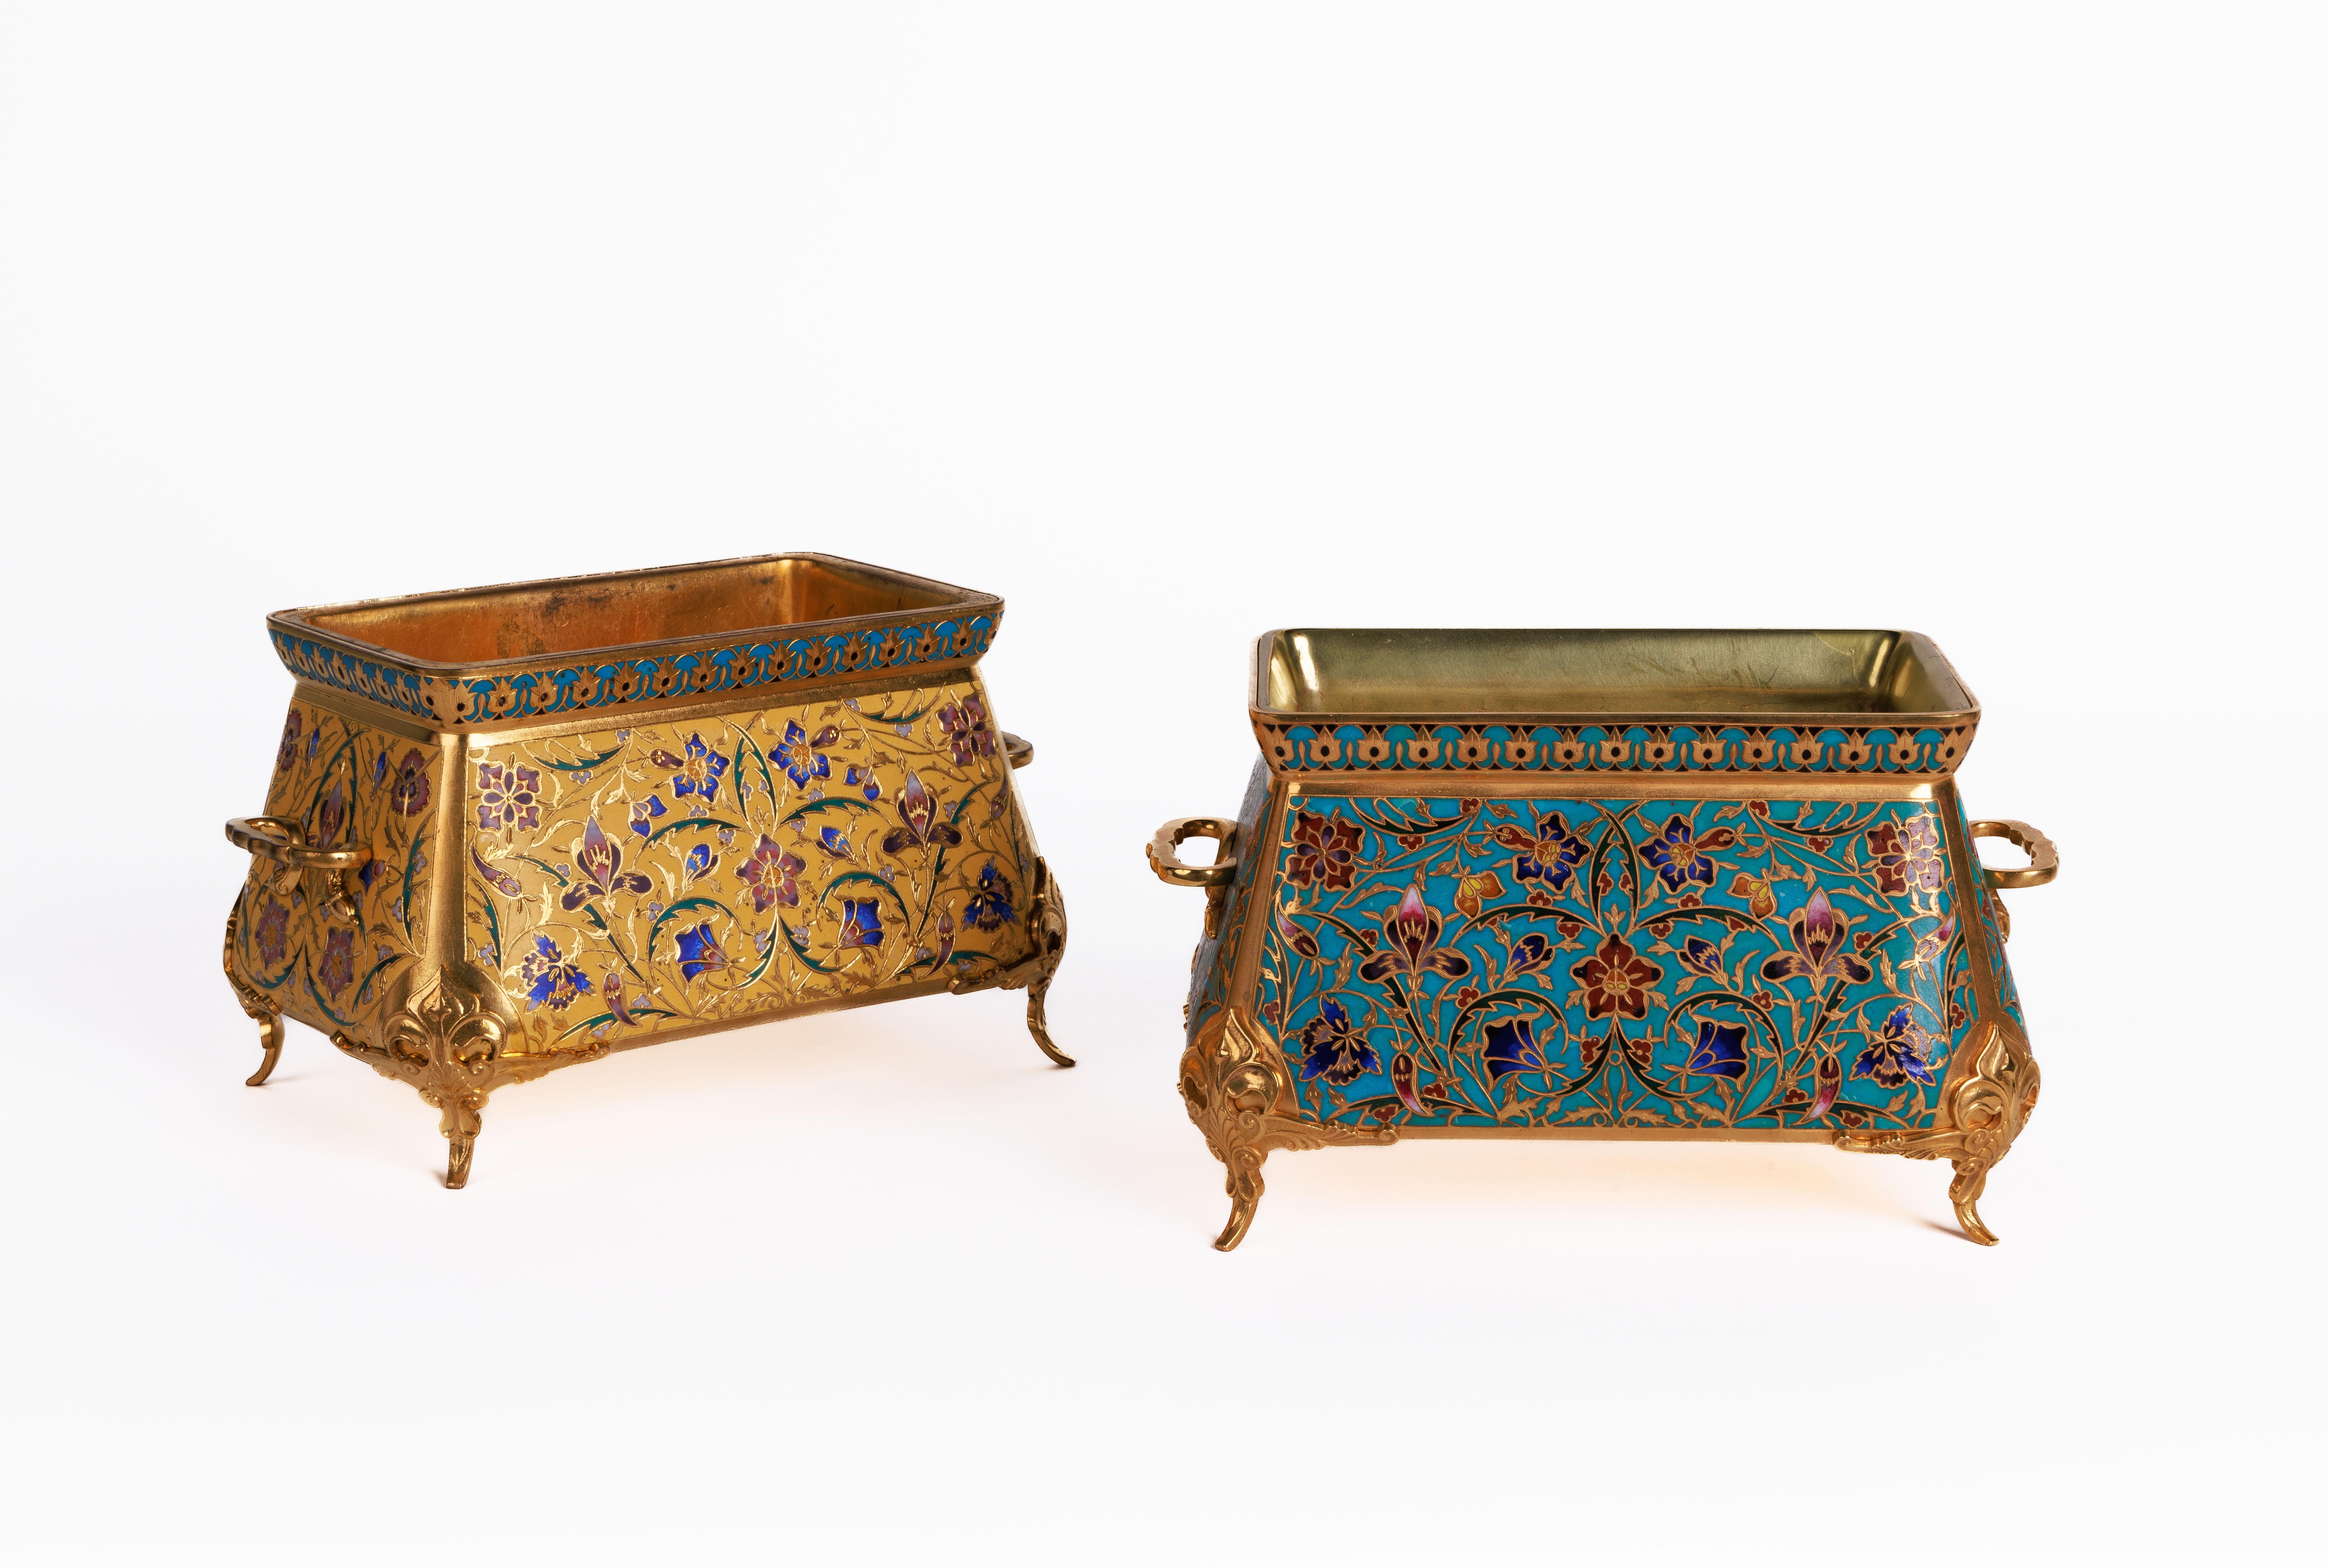 Ferdinand Barbedienne, A French Ormolu and Champleve Enamel Jardiniere, C. 1870 For Sale 5